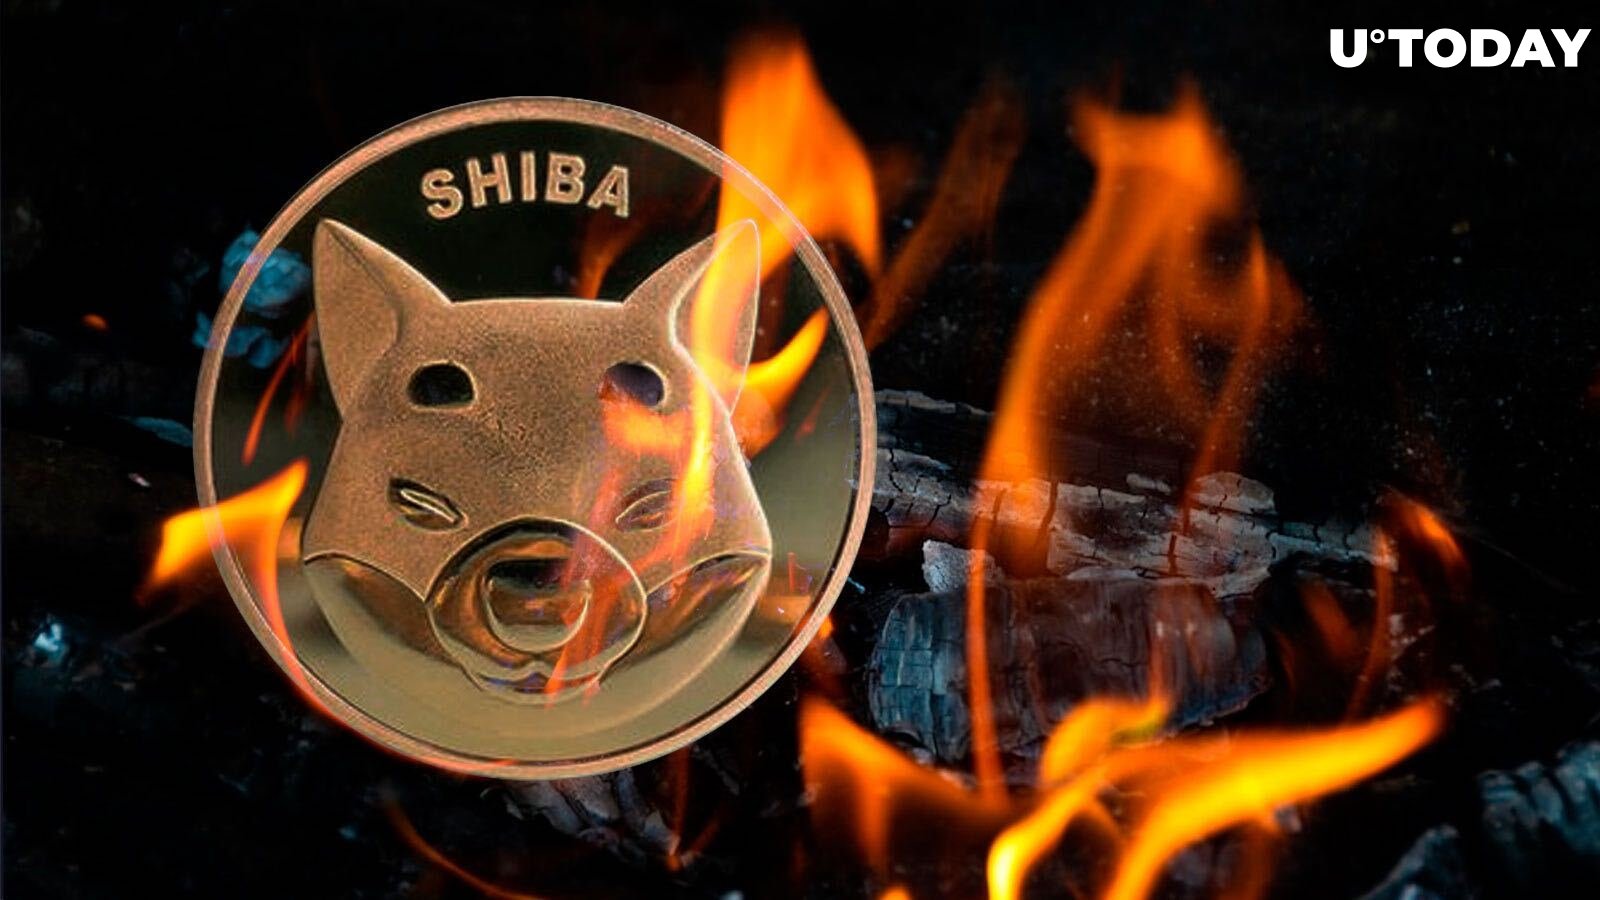 Shiba Inu Records 3.6 Billion SHIB Burned in August with Only 59% of Initial Supply Left